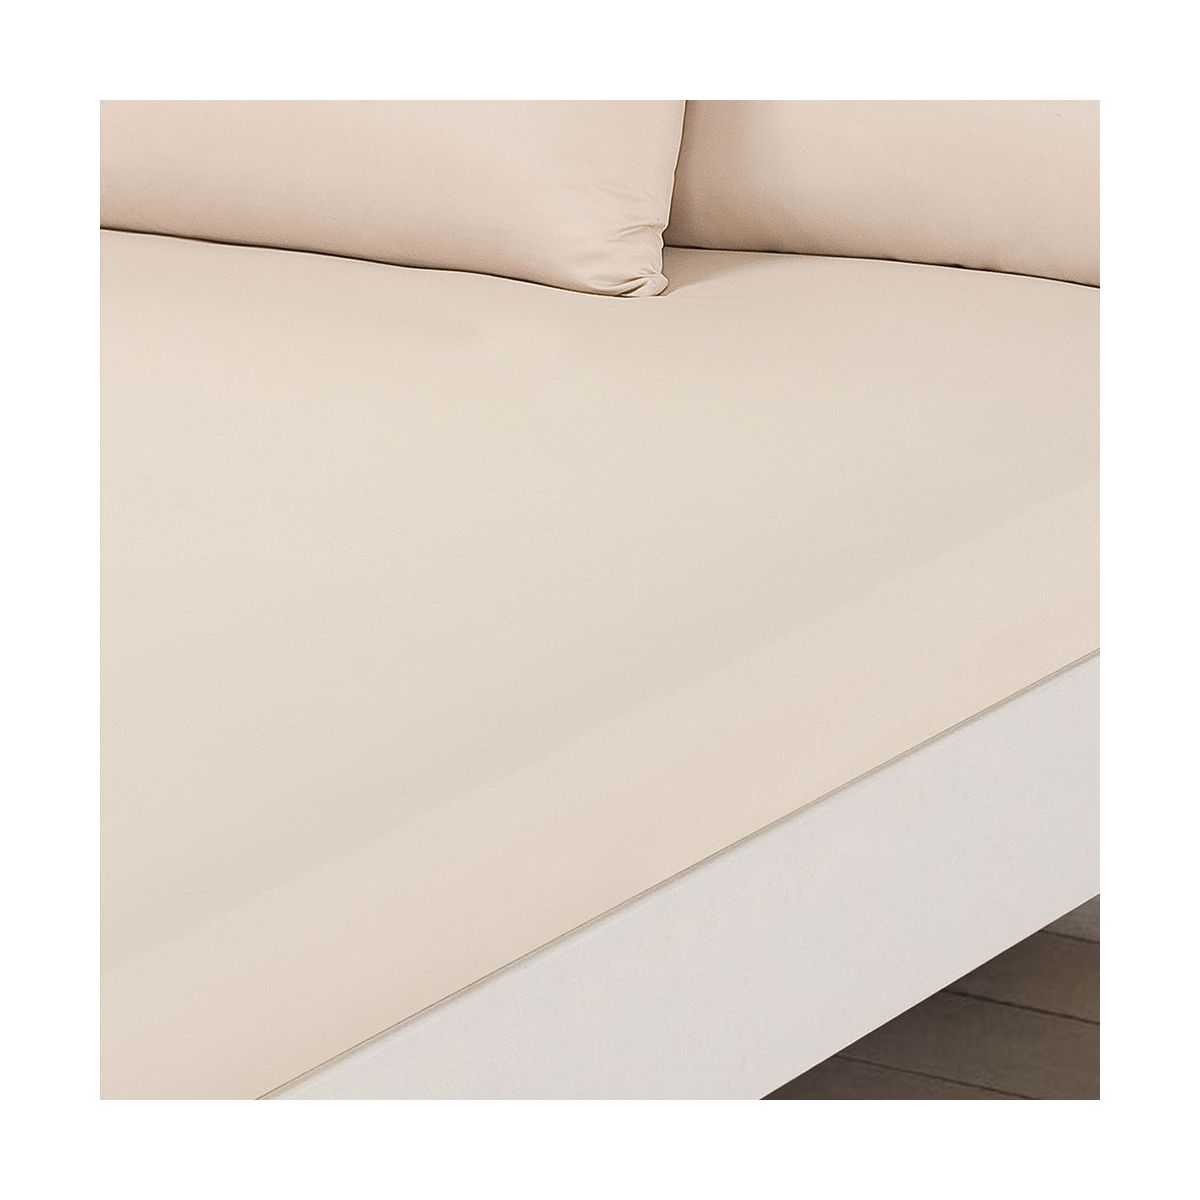 Brentfords Plain Dyed King Size Fitted Sheet - Cream